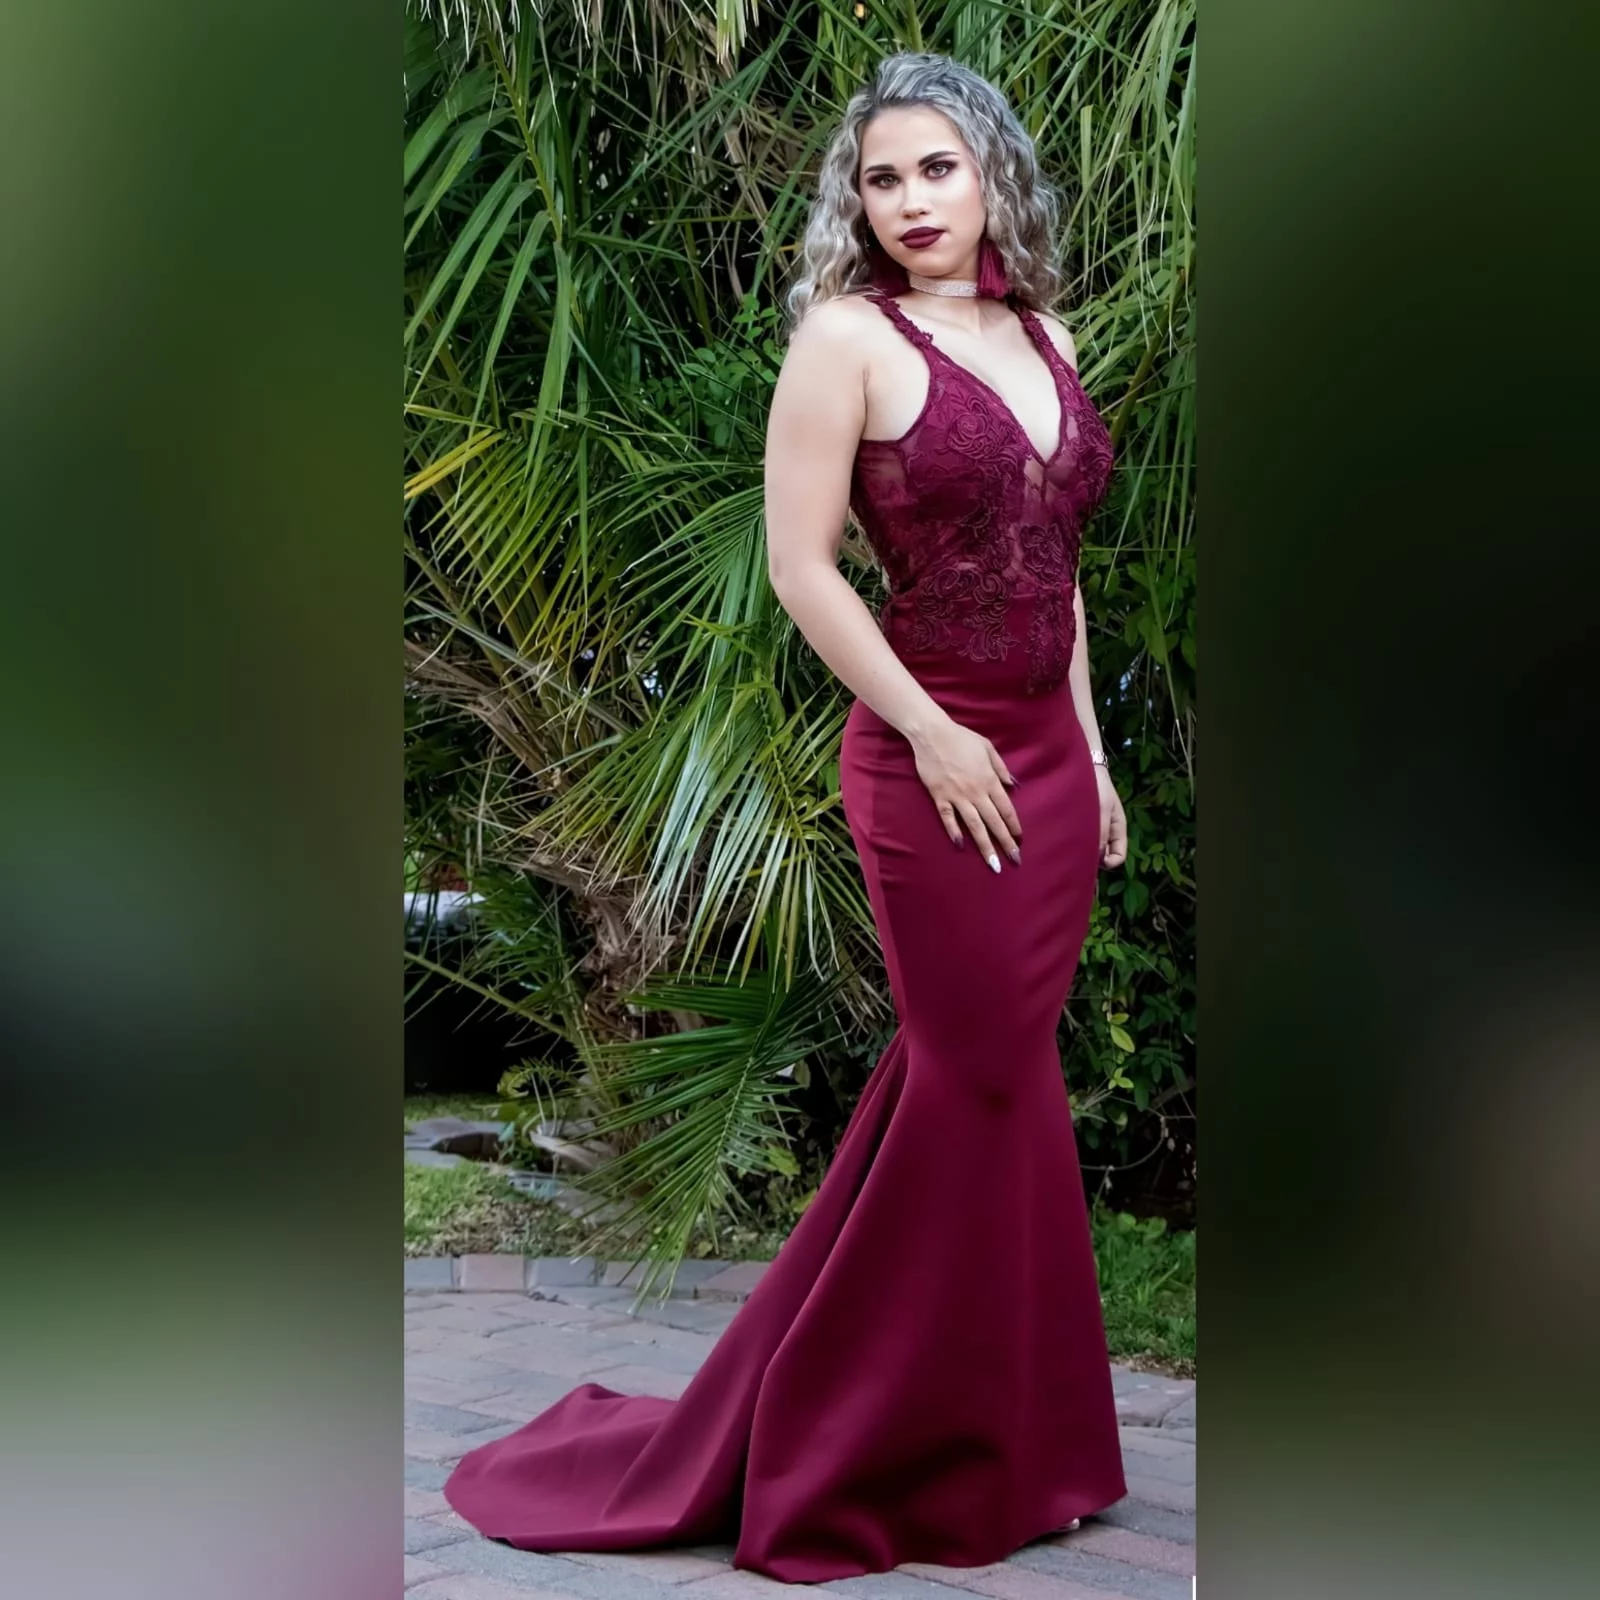 Burgundy soft mermaid sexy elegant matric dance dress 3 burgundy soft mermaid sexy elegant matric dance dress. With an illusion lace bodice with deep v neckline, low open v back with strap detail, with a train